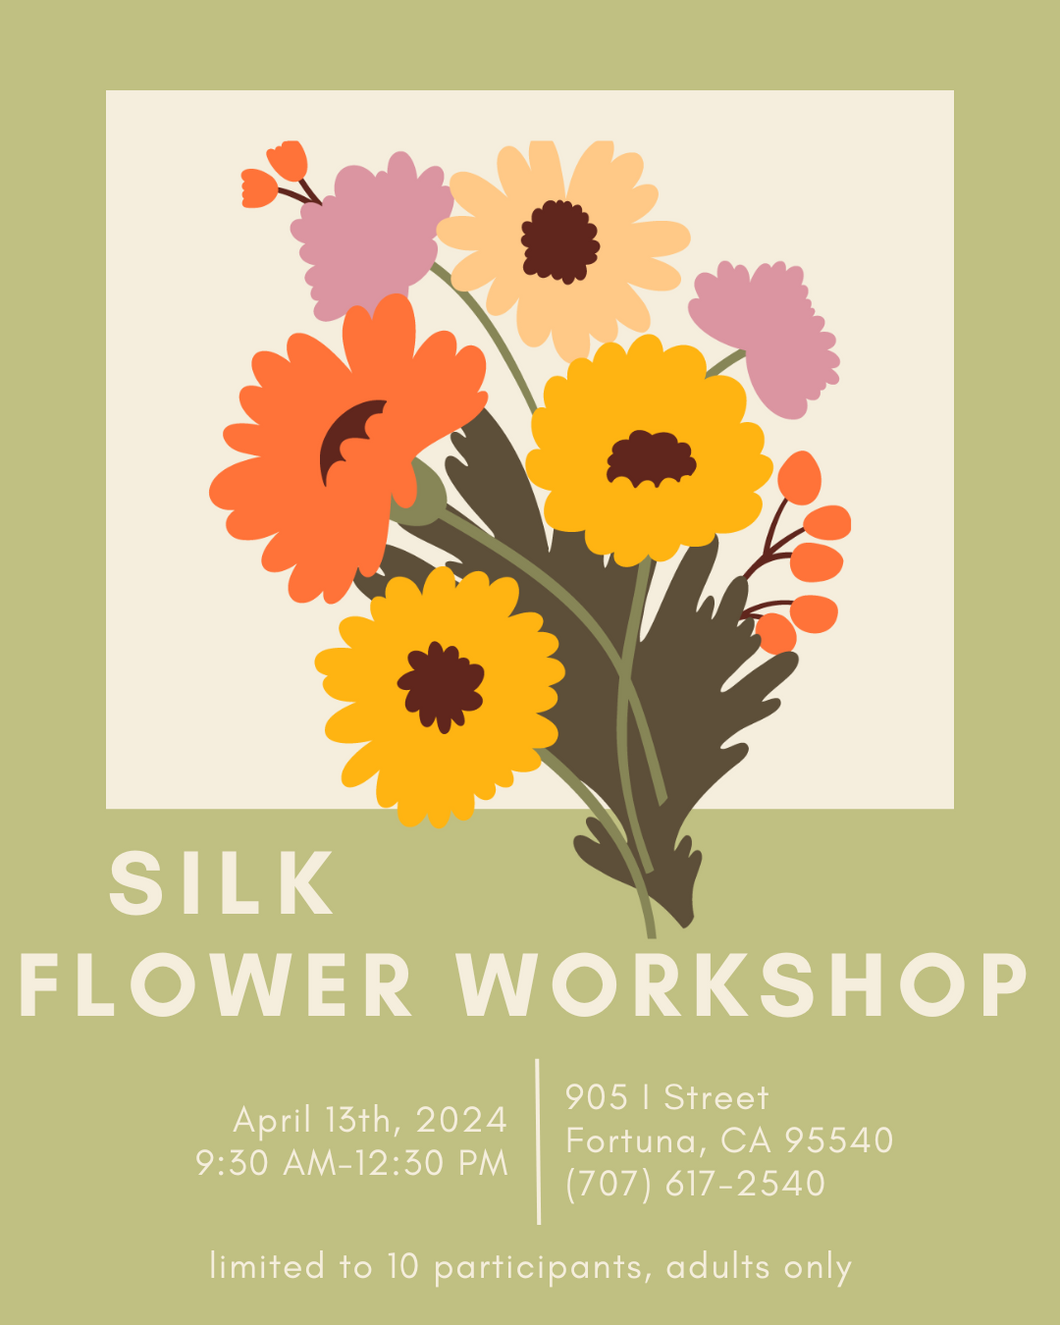 Silk Flower Workshop poster which says that the workshop will happen April 13th, 2024 from 9:30 AM to 12:30 PM at 905 I Street Fortuna, CA 95540. The phone number for the shop is (707) 617-2540. The workshop is limited to 10 participants and is for adults only.